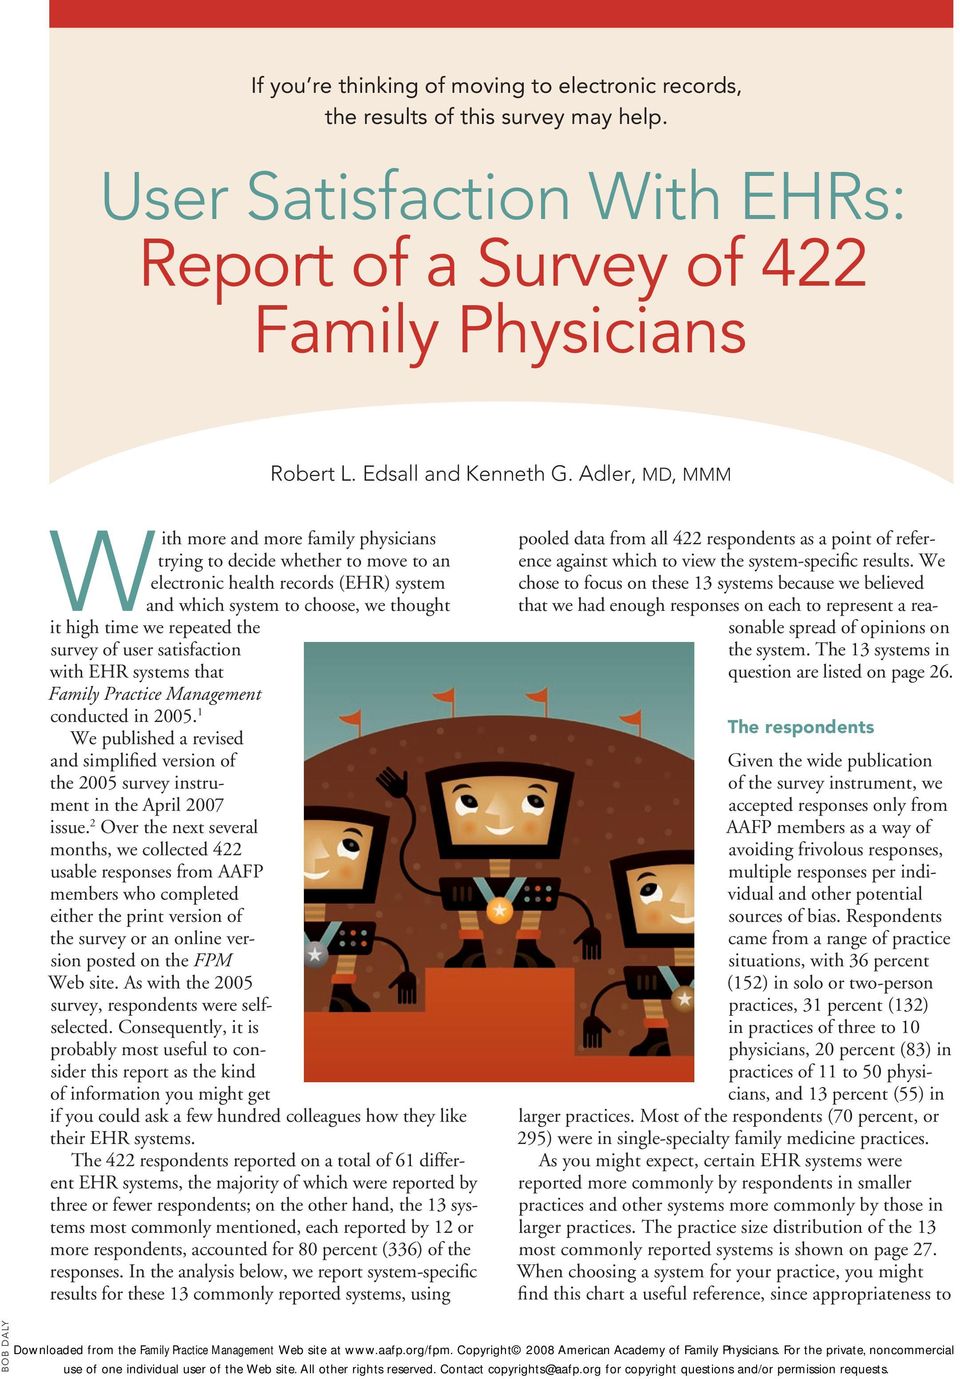 survey of user satisfaction with EHR systems that Family Practice Management conducted in 2005. 1 We published a revised and simplified version of the 2005 survey instrument in the April 2007 issue.